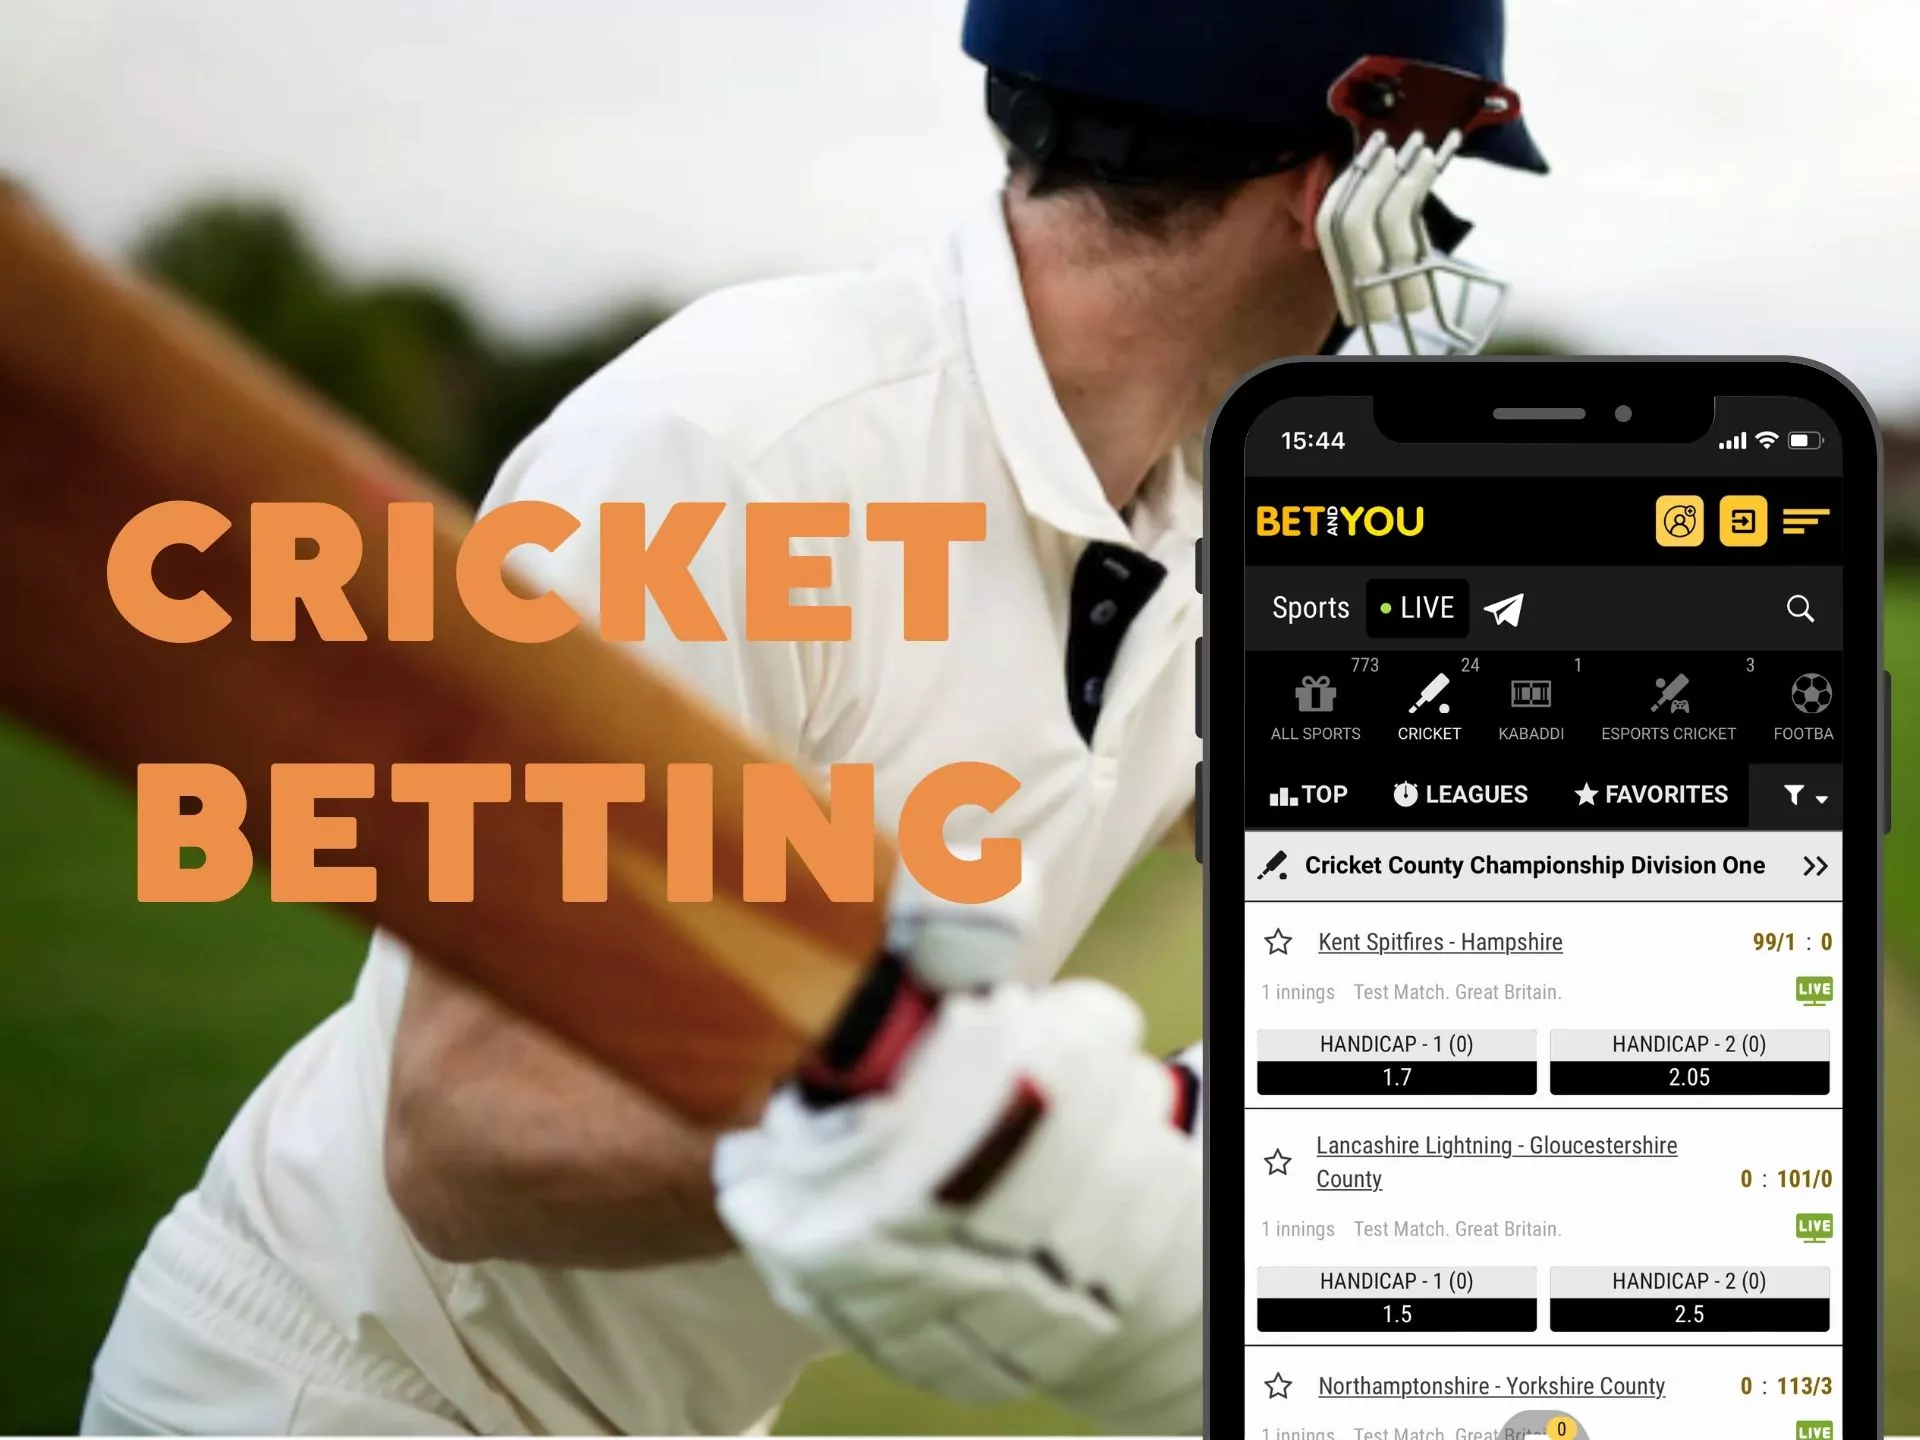 Most of well-known cricket leagues are available for betting.